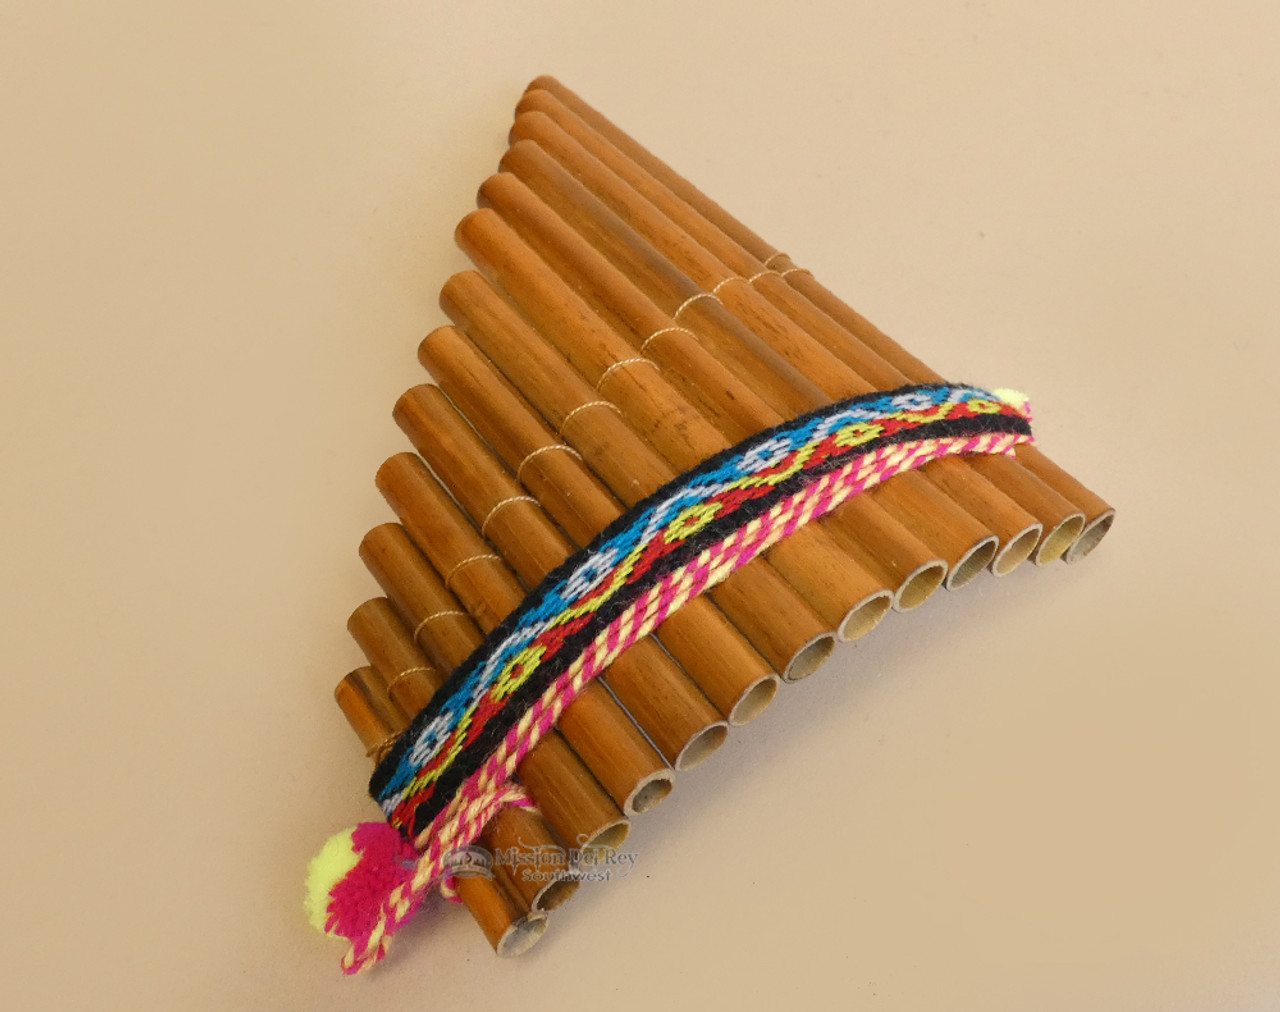 Bamboo Pan Flute in Green with Pipes of Different Notes